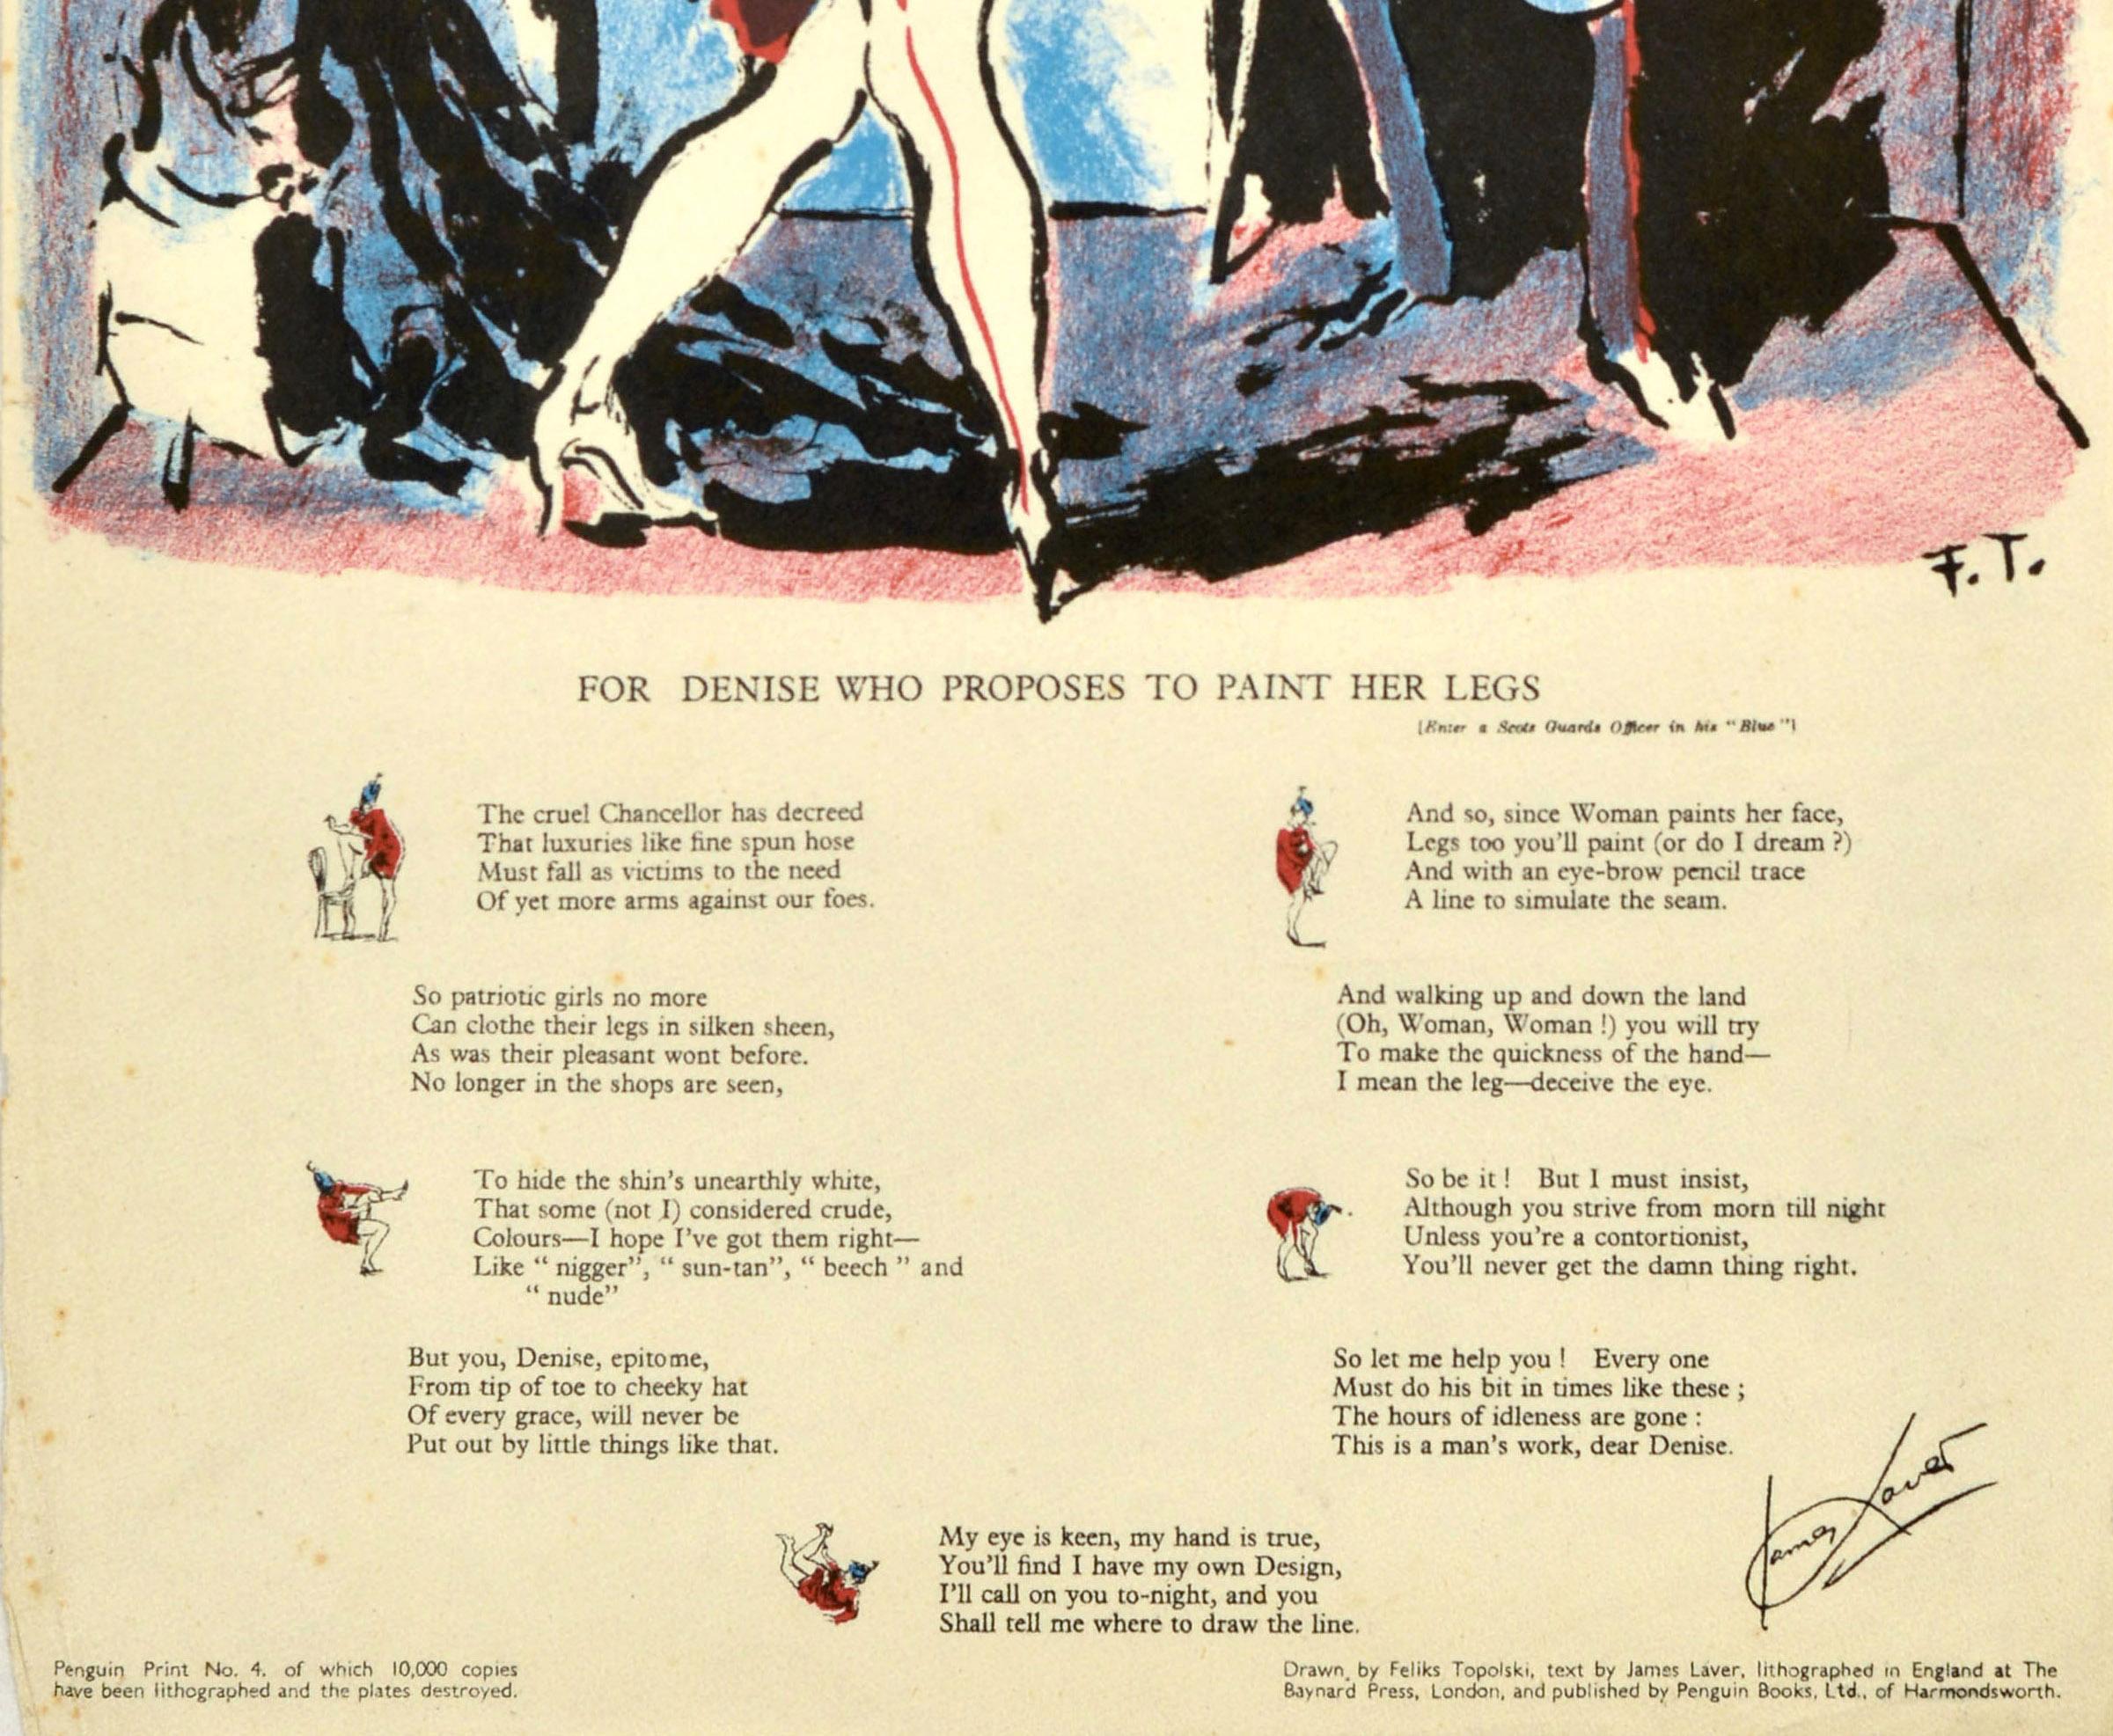 British Original Vintage War Poster For Denise Who Proposes To Paint Her Legs Poem WWII